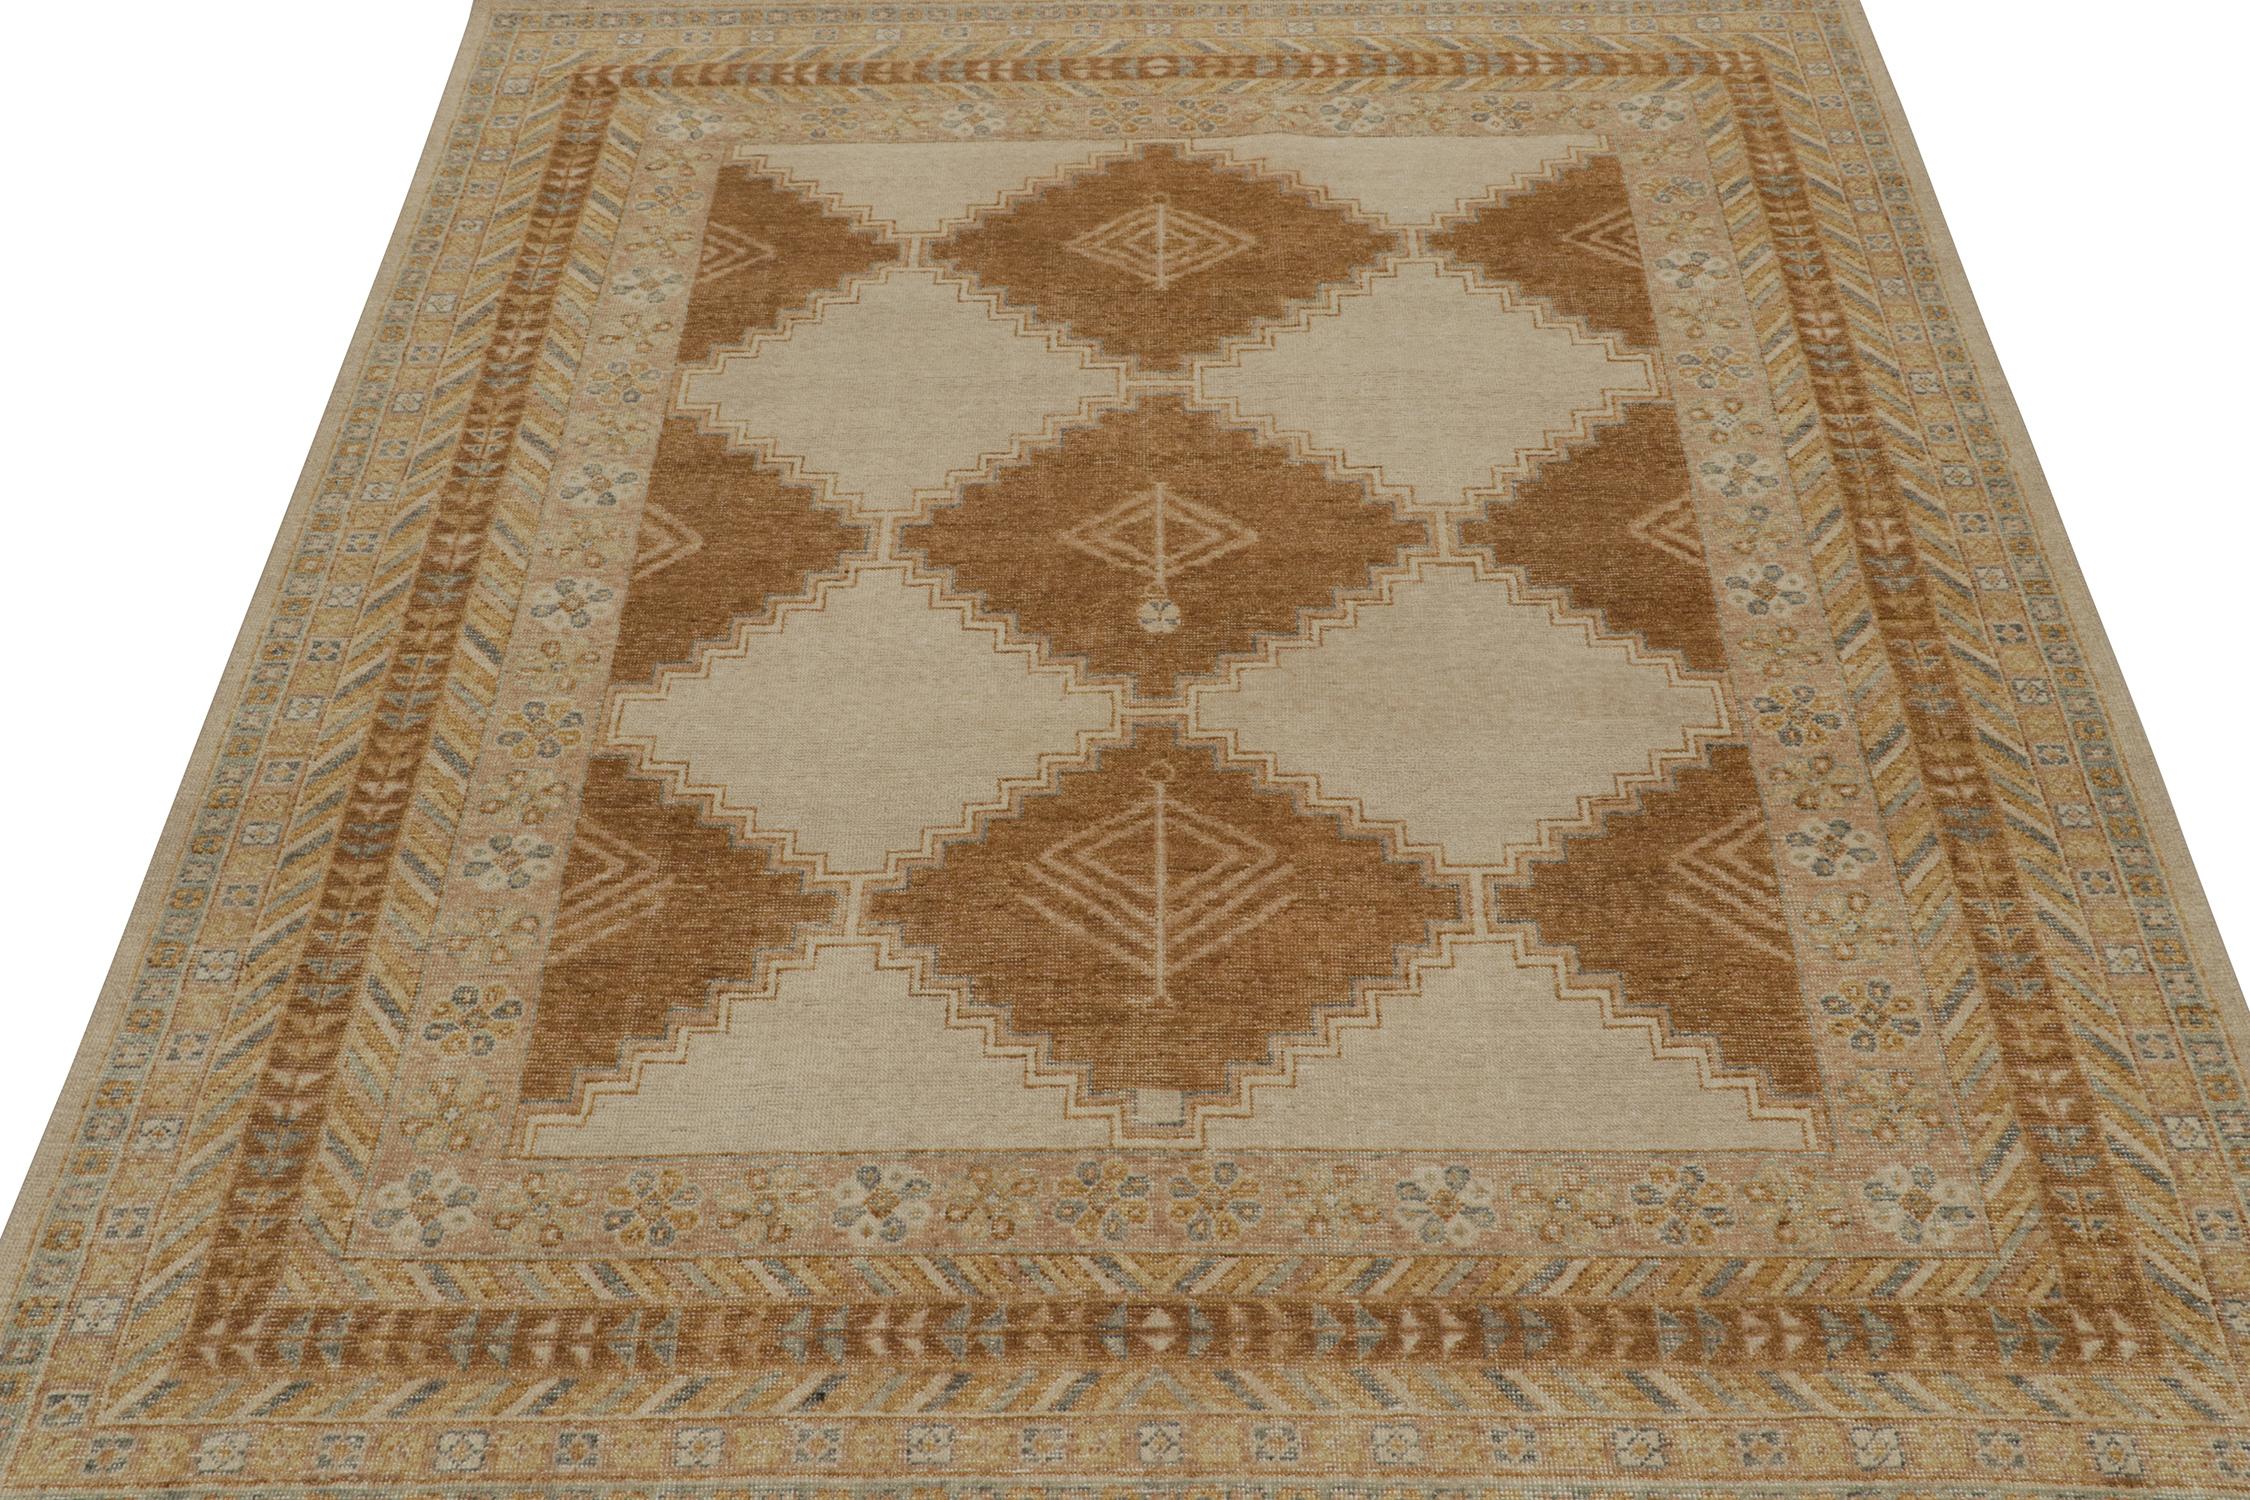 This 8x10 rug is a new addition to Rug & Kilim’s Homage Collection. Hand-knotted in wool and cotton, it recaptures an antique tribal rug pattern in a new take on distressed texture.

On the Design:

One can’t help but admire the balance of warm